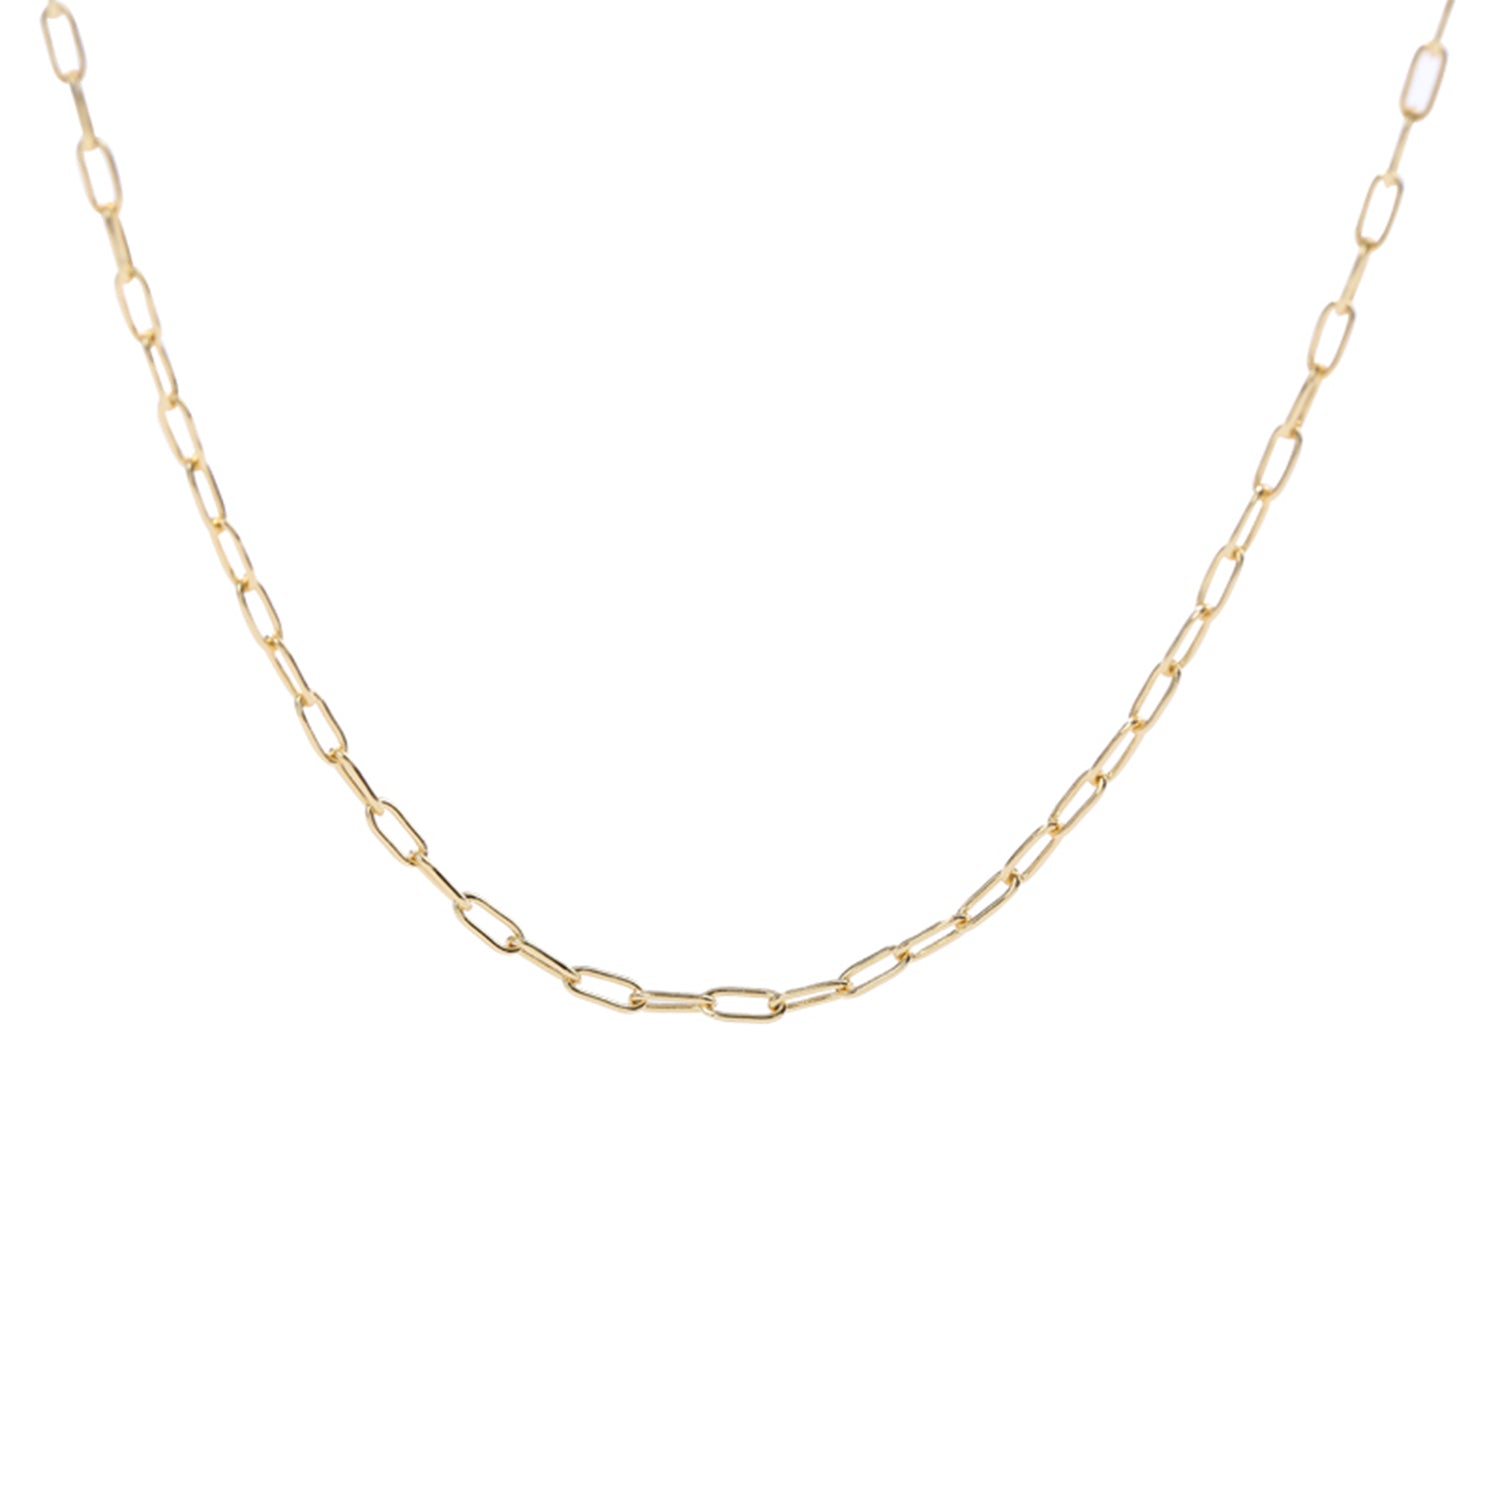 Brixton Chain - 14k Solid Gold